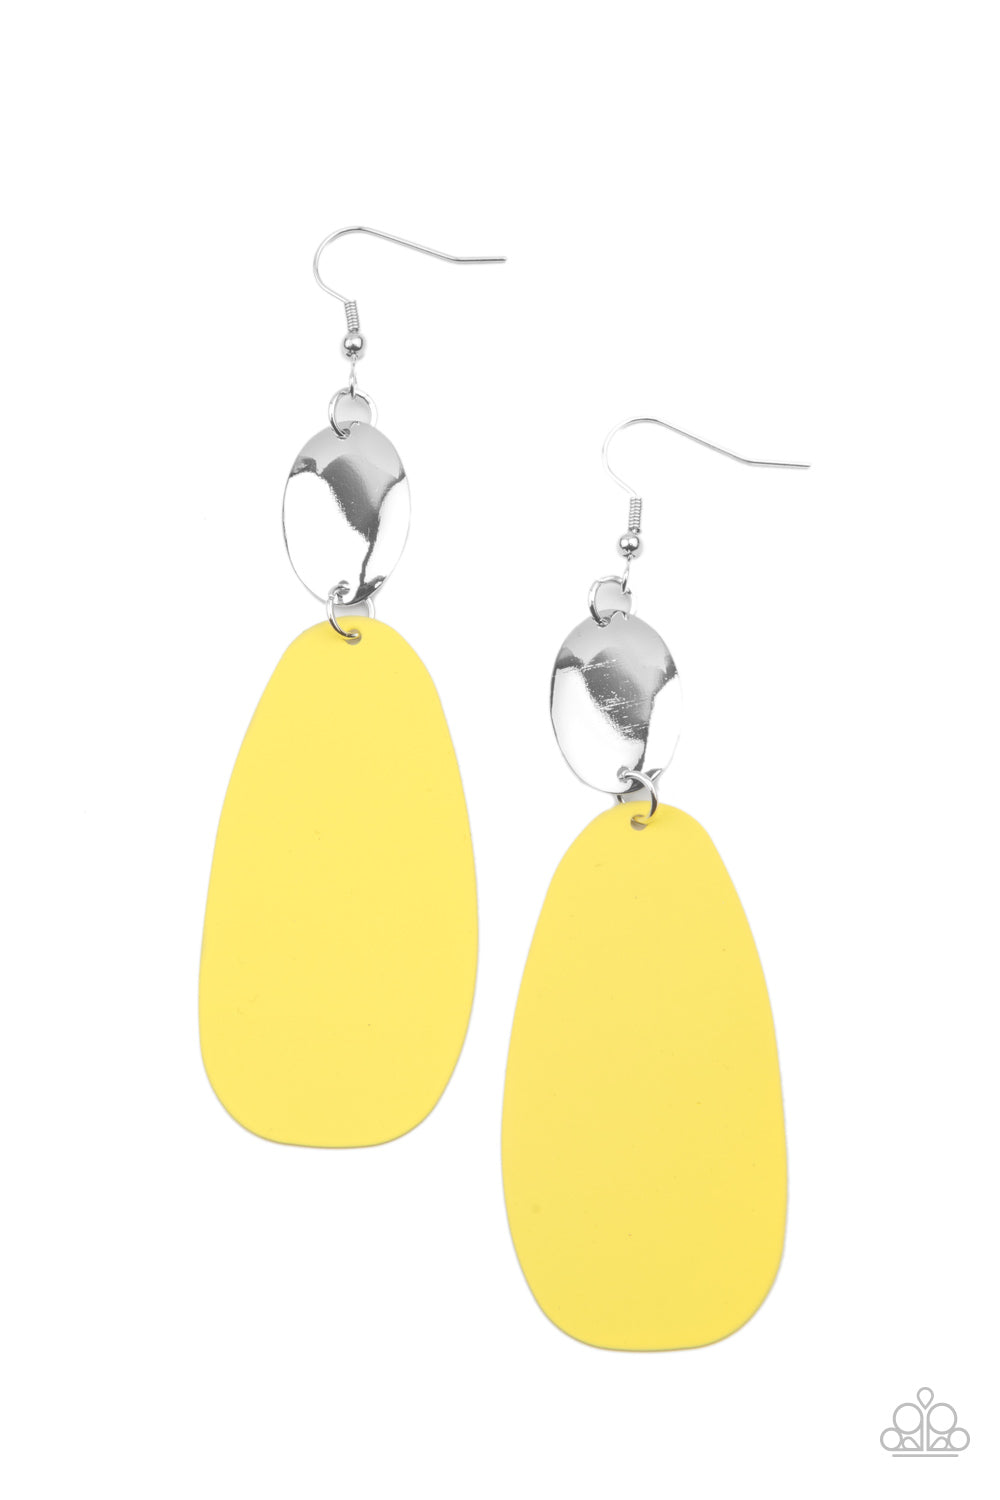 Vivaciously Vogue Yellow Earring